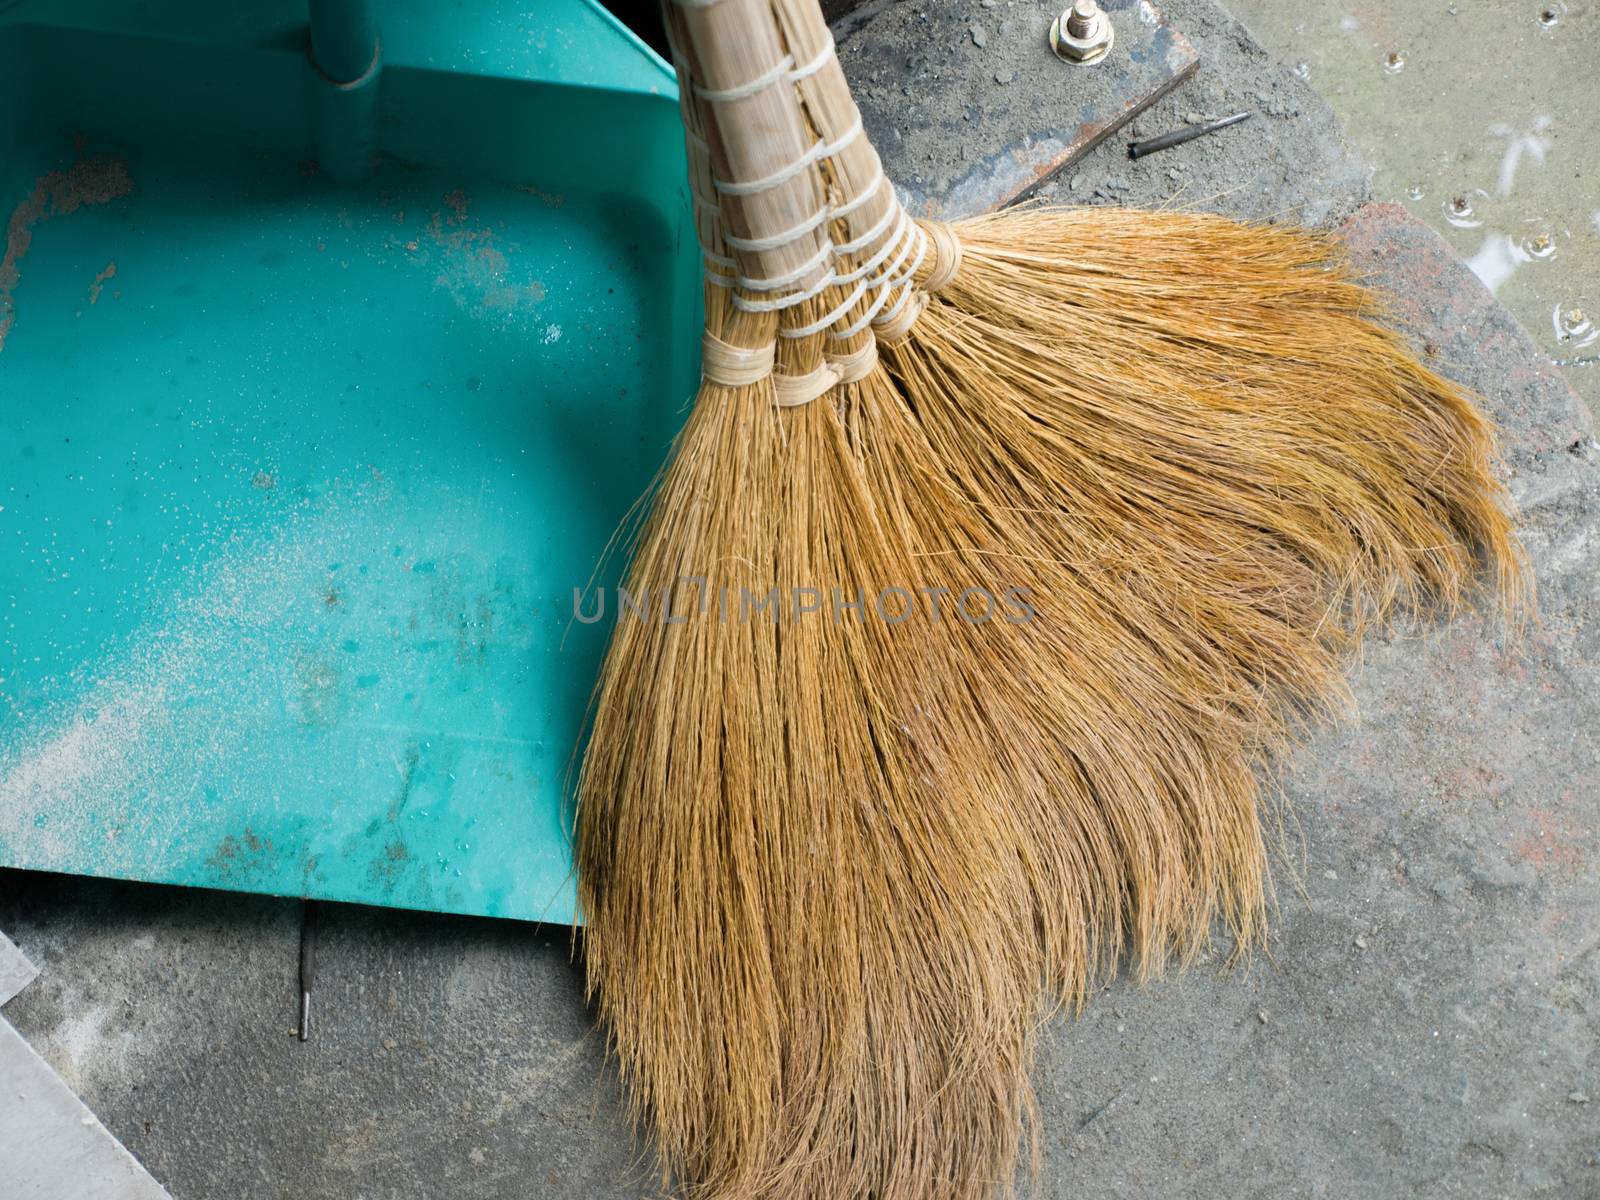 COLOR PHOTO OF TYPICAL SOFT BROOM AND DUSTPAN